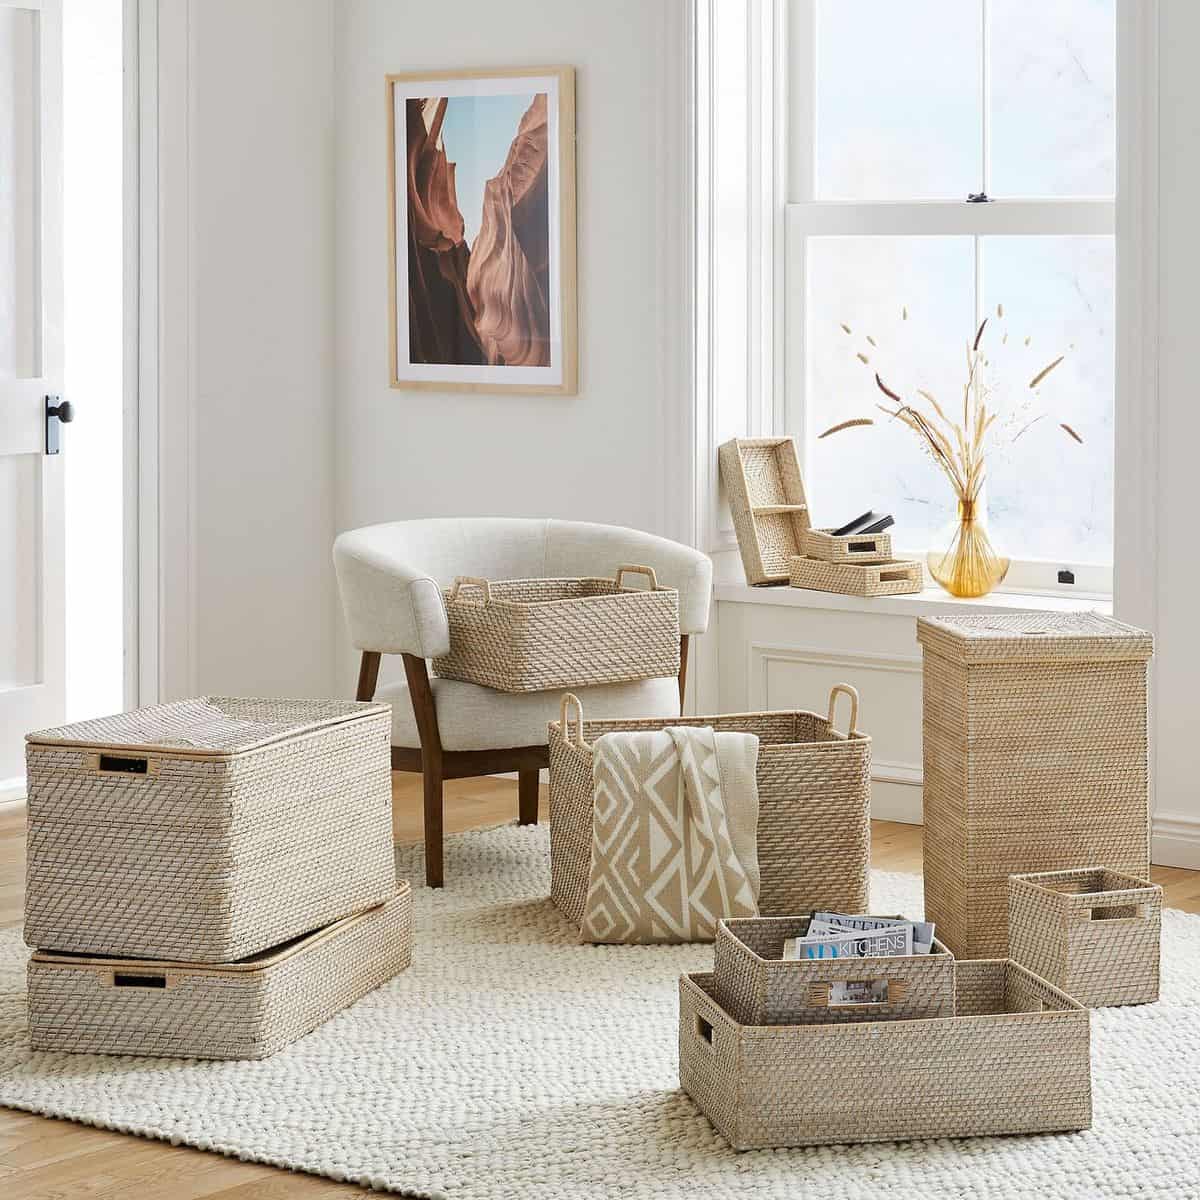 The 20 Best Designer Baskets for Your Dream Home